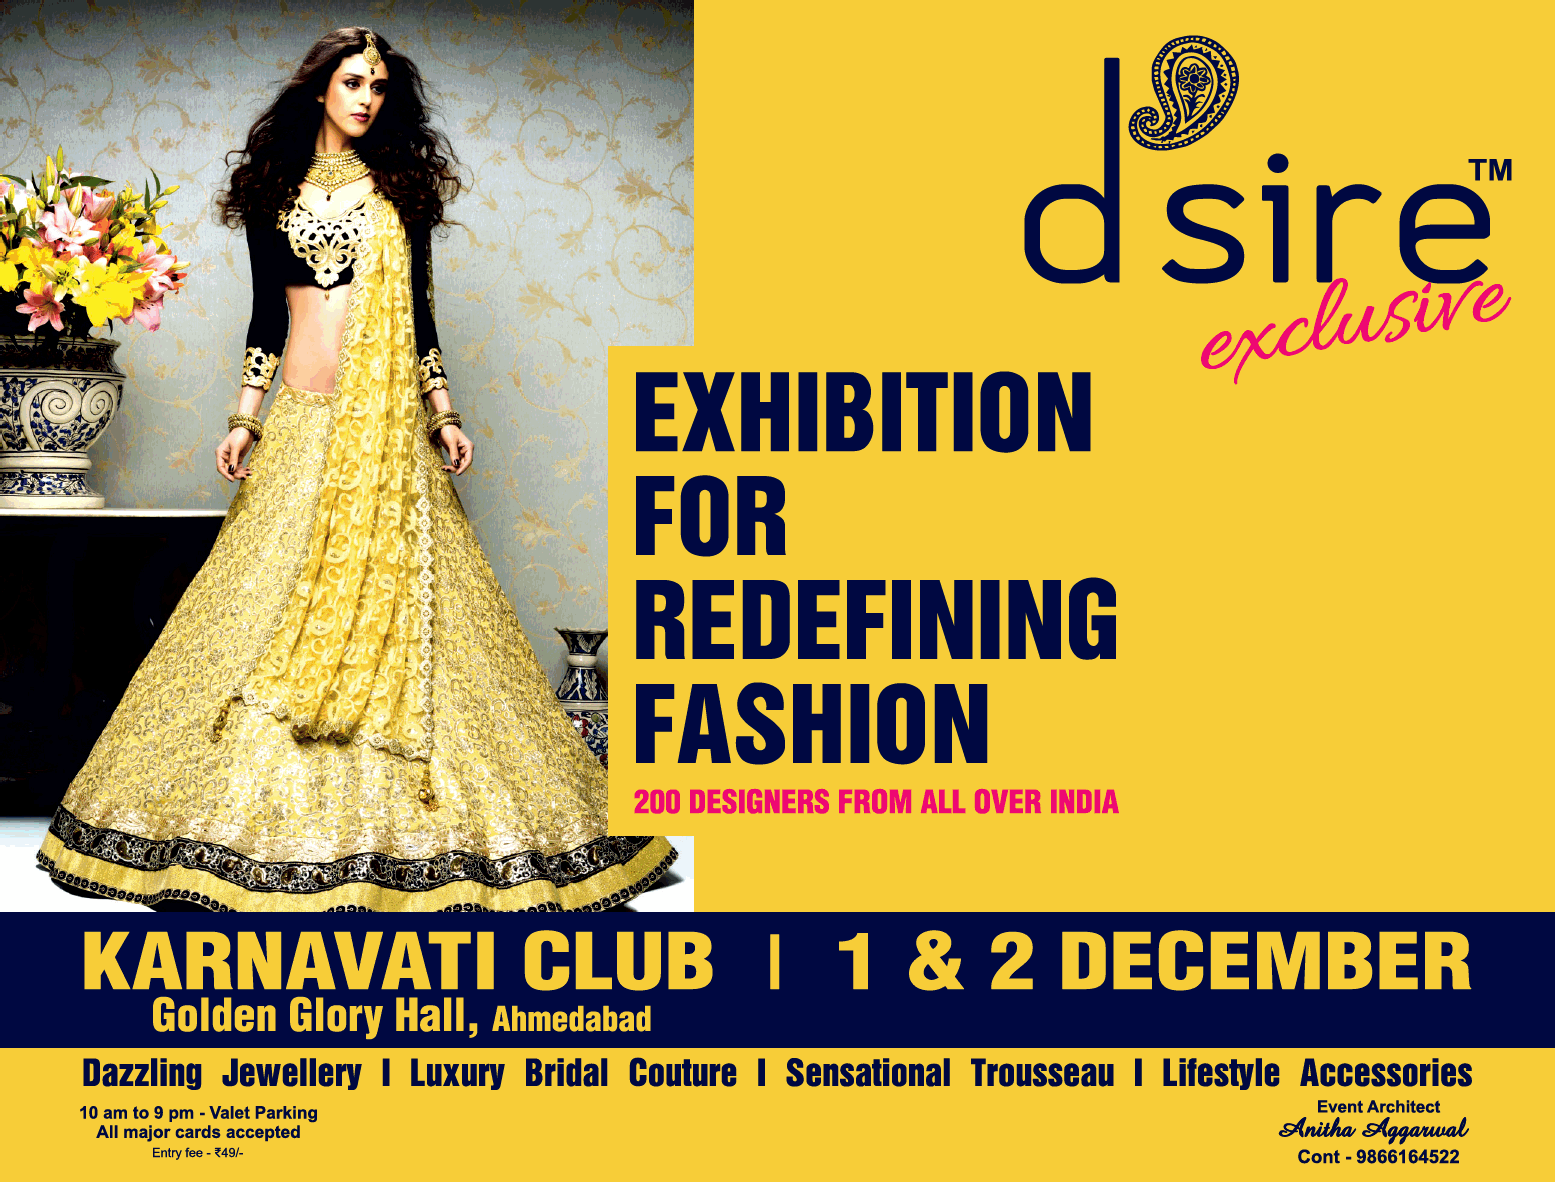 dsire-exclusive-exhibition-for-redefining-fashion-200-designers-from